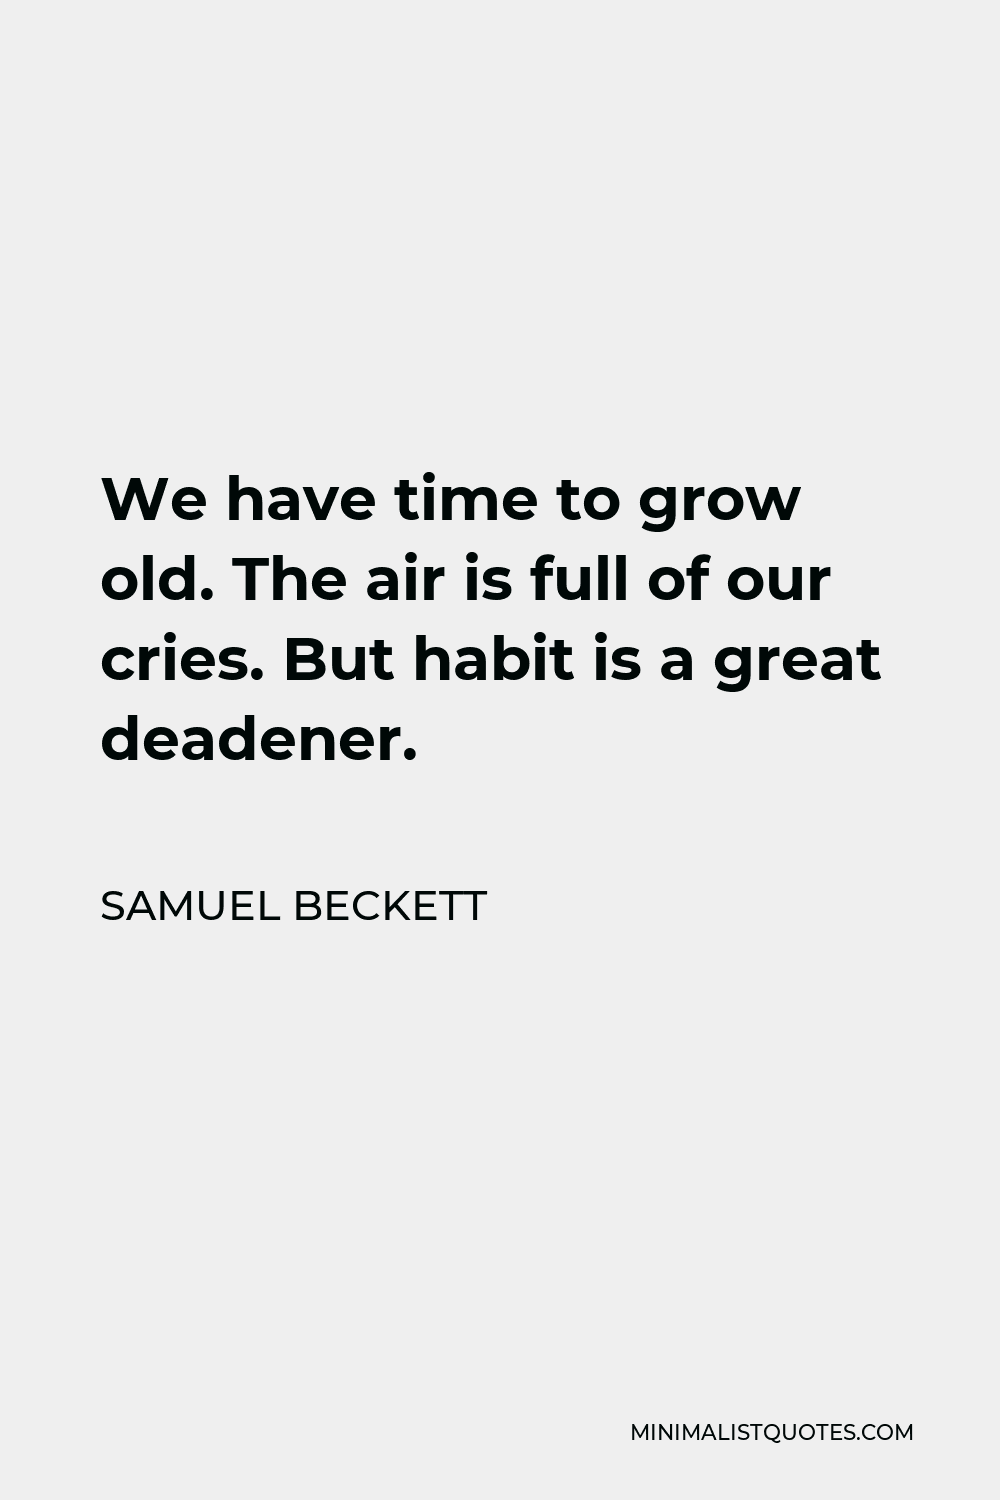 Samuel Beckett Quote - We have time to grow old. The air is full of our cries. But habit is a great deadener.